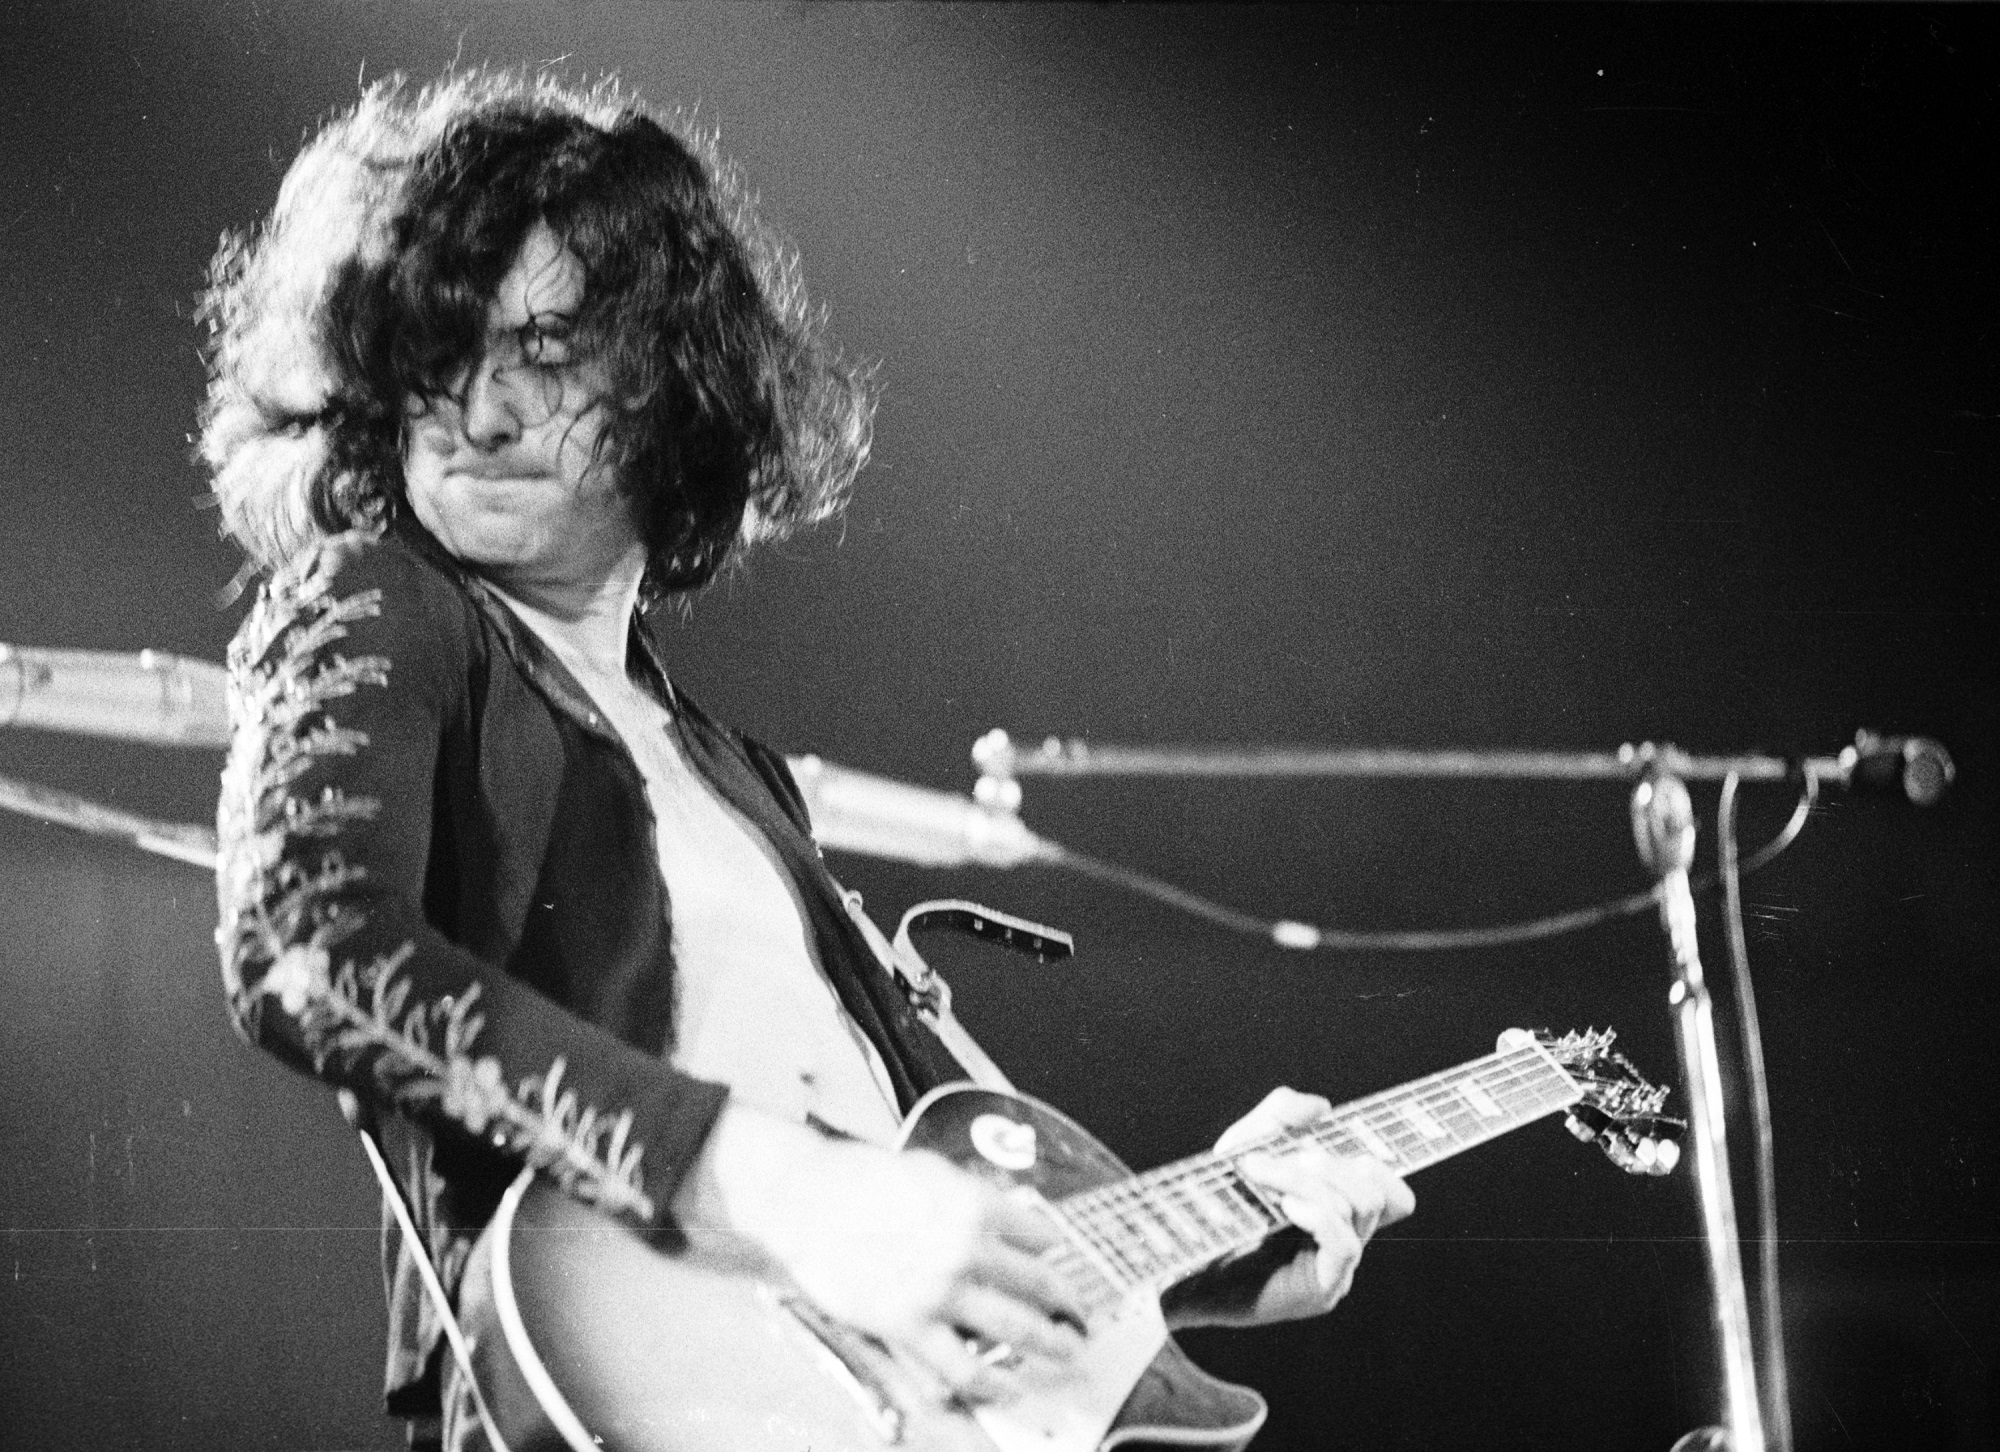 Jimmy Page Was Into Indian and Avant-Garde Music Before The Beatles